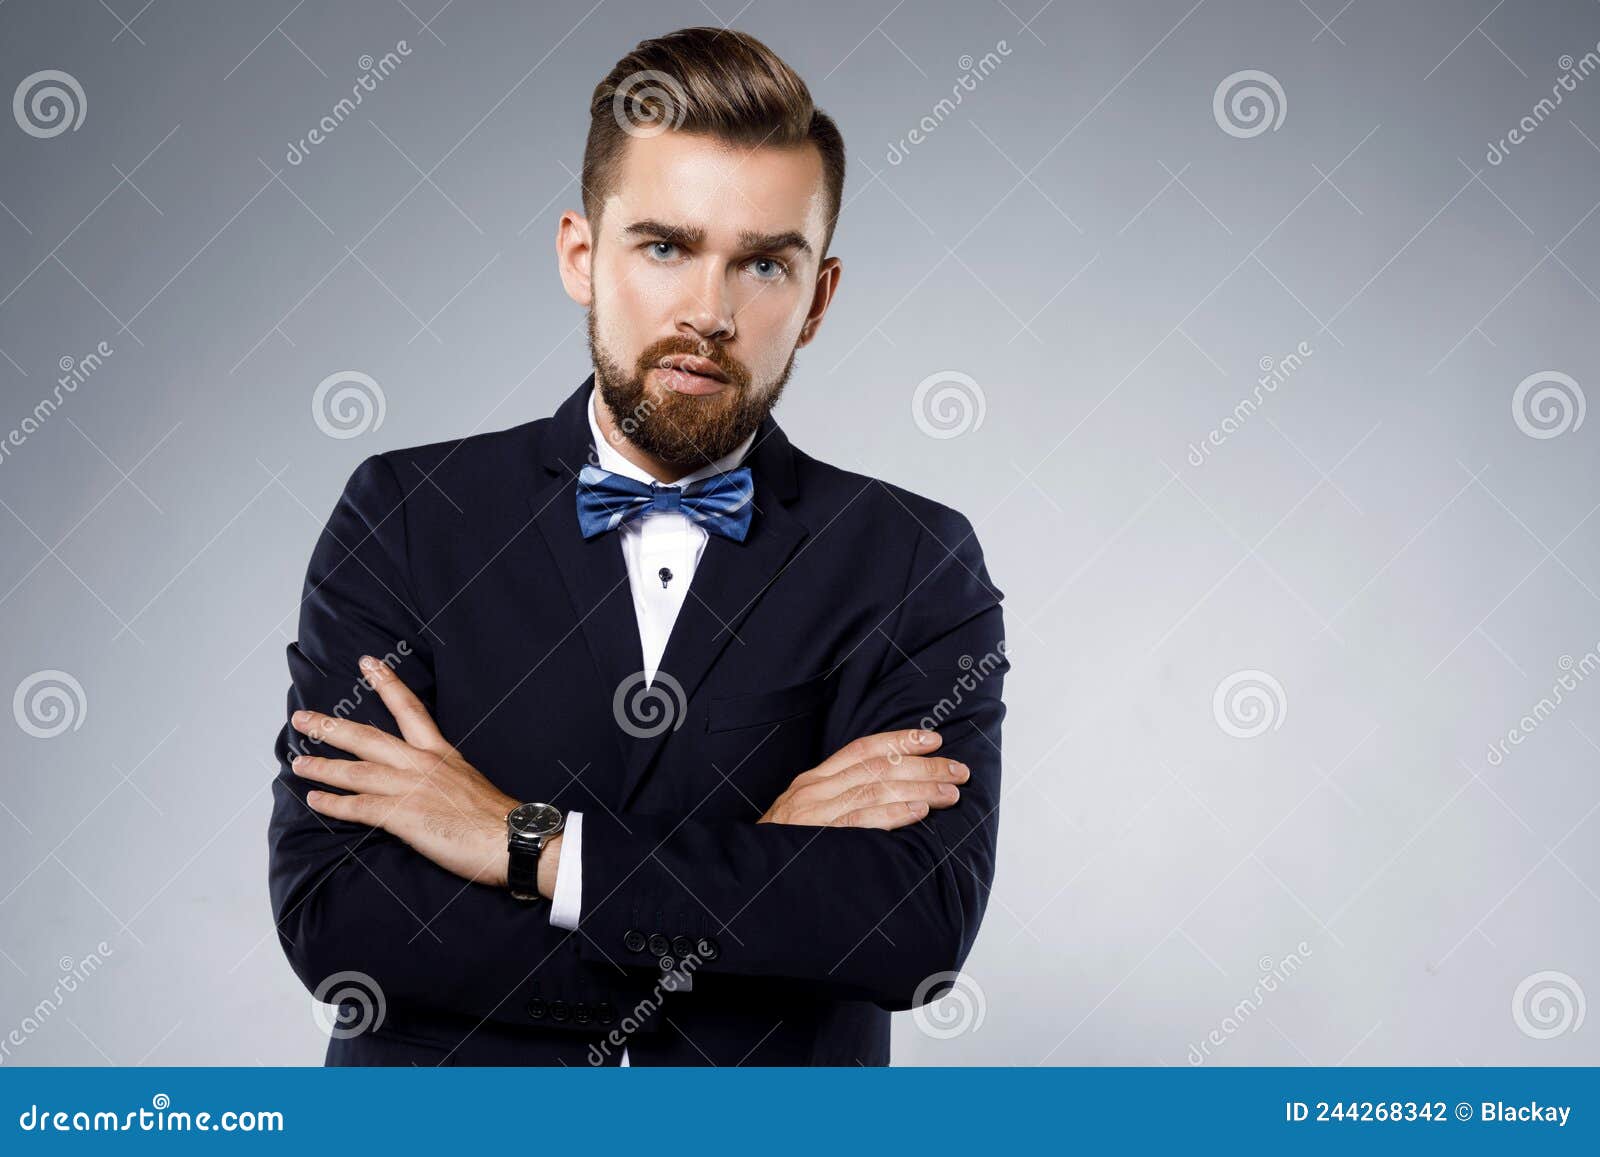 Stylish Handsome Man Wearing a Classic Suit with Bow-tie Stock Photo ...